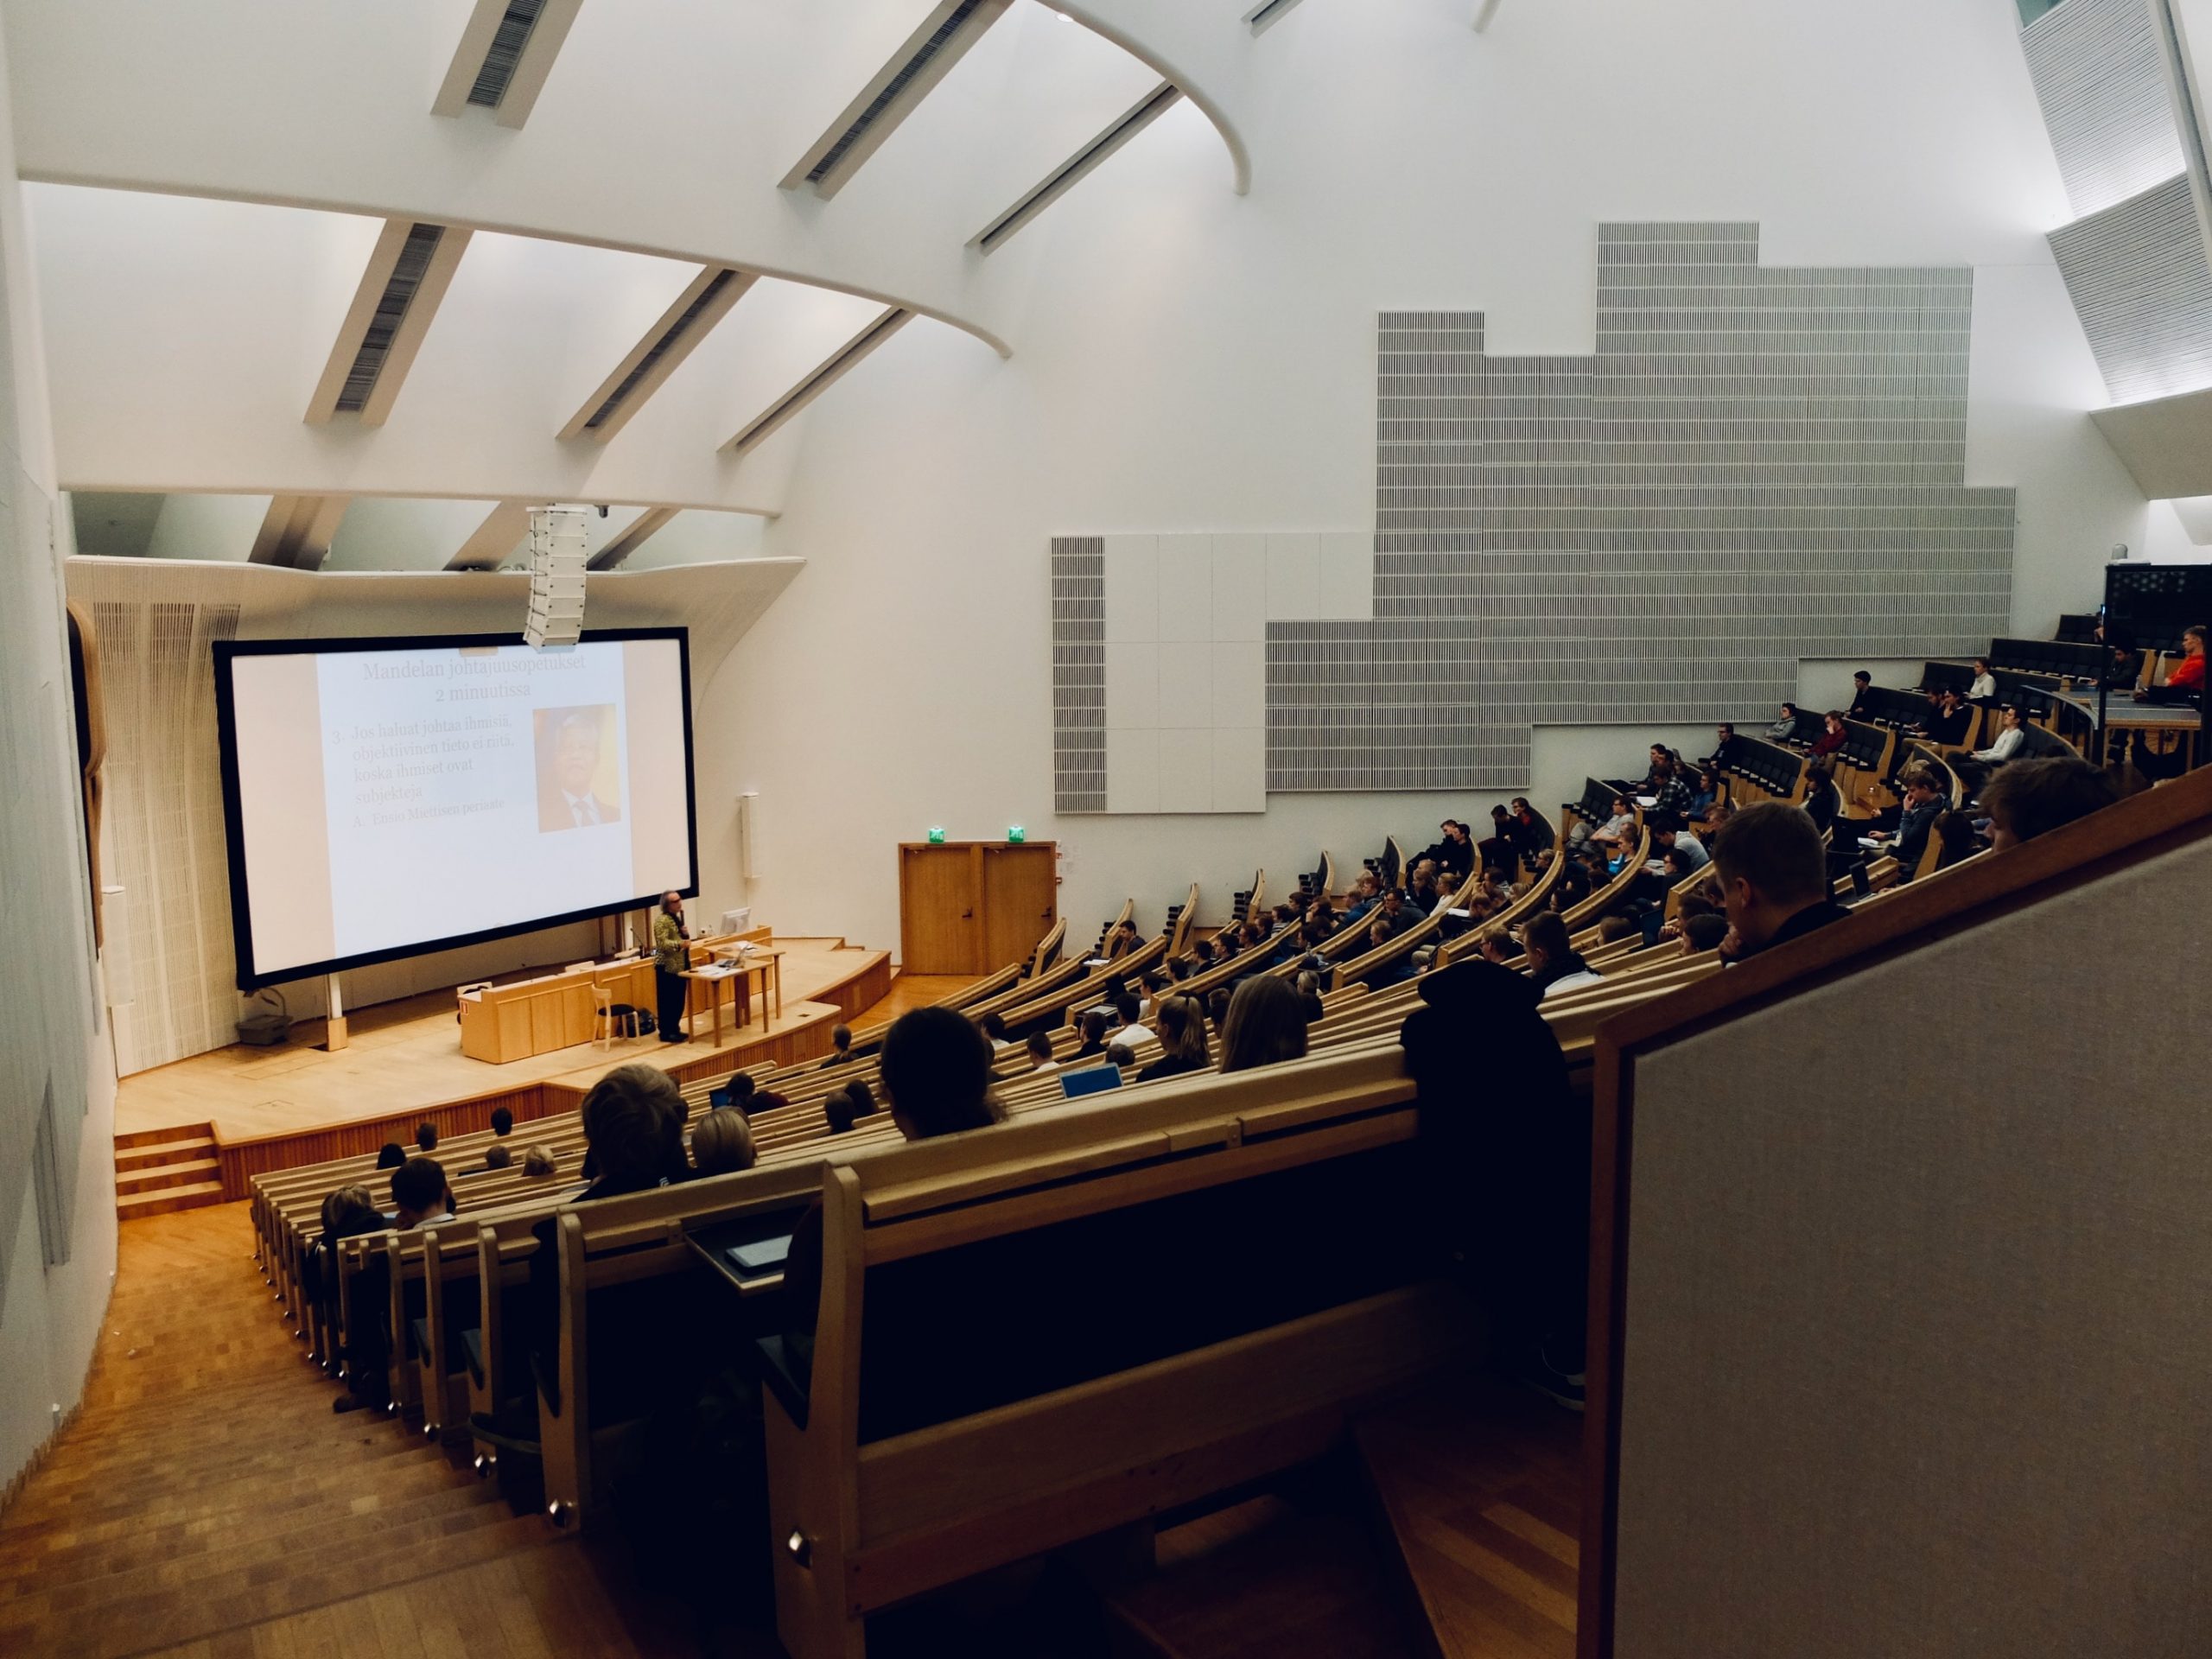 A lecture hall at the University of Virginia, featuring a large screen and an audience of people.